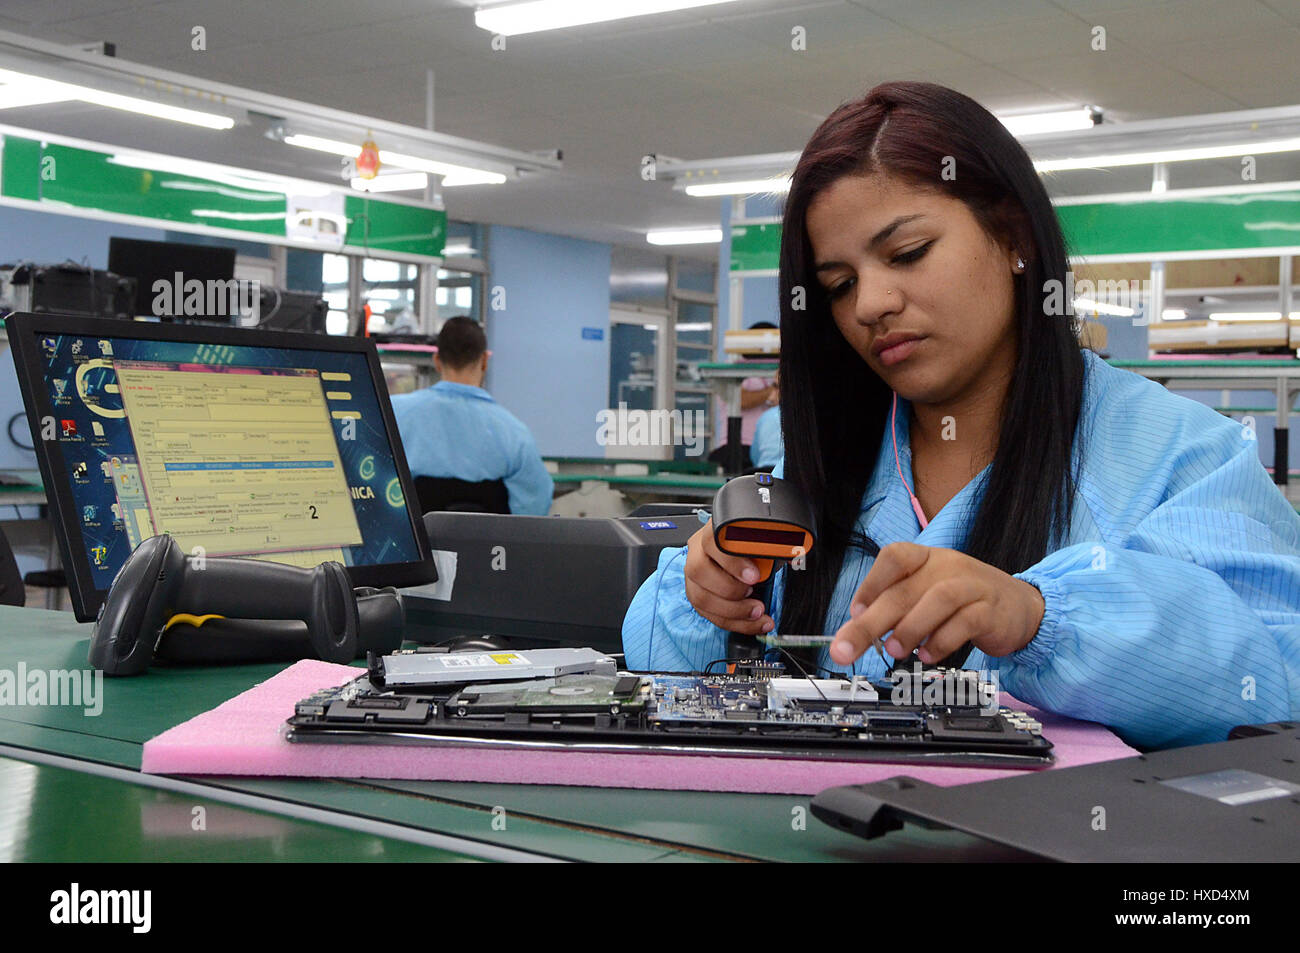 Havana. 20th Mar, 2017. Image taken on March 20, 2017 shows a woman working at a national laptop and tablet factory in Havana, Cuba. On the outskirts of Havana, the brand new assembly plant is helping to propel this long-languishing Caribbean country into the 21st century. Credit: Joaquin Hernandez/Xinhua/Alamy Live News Stock Photo